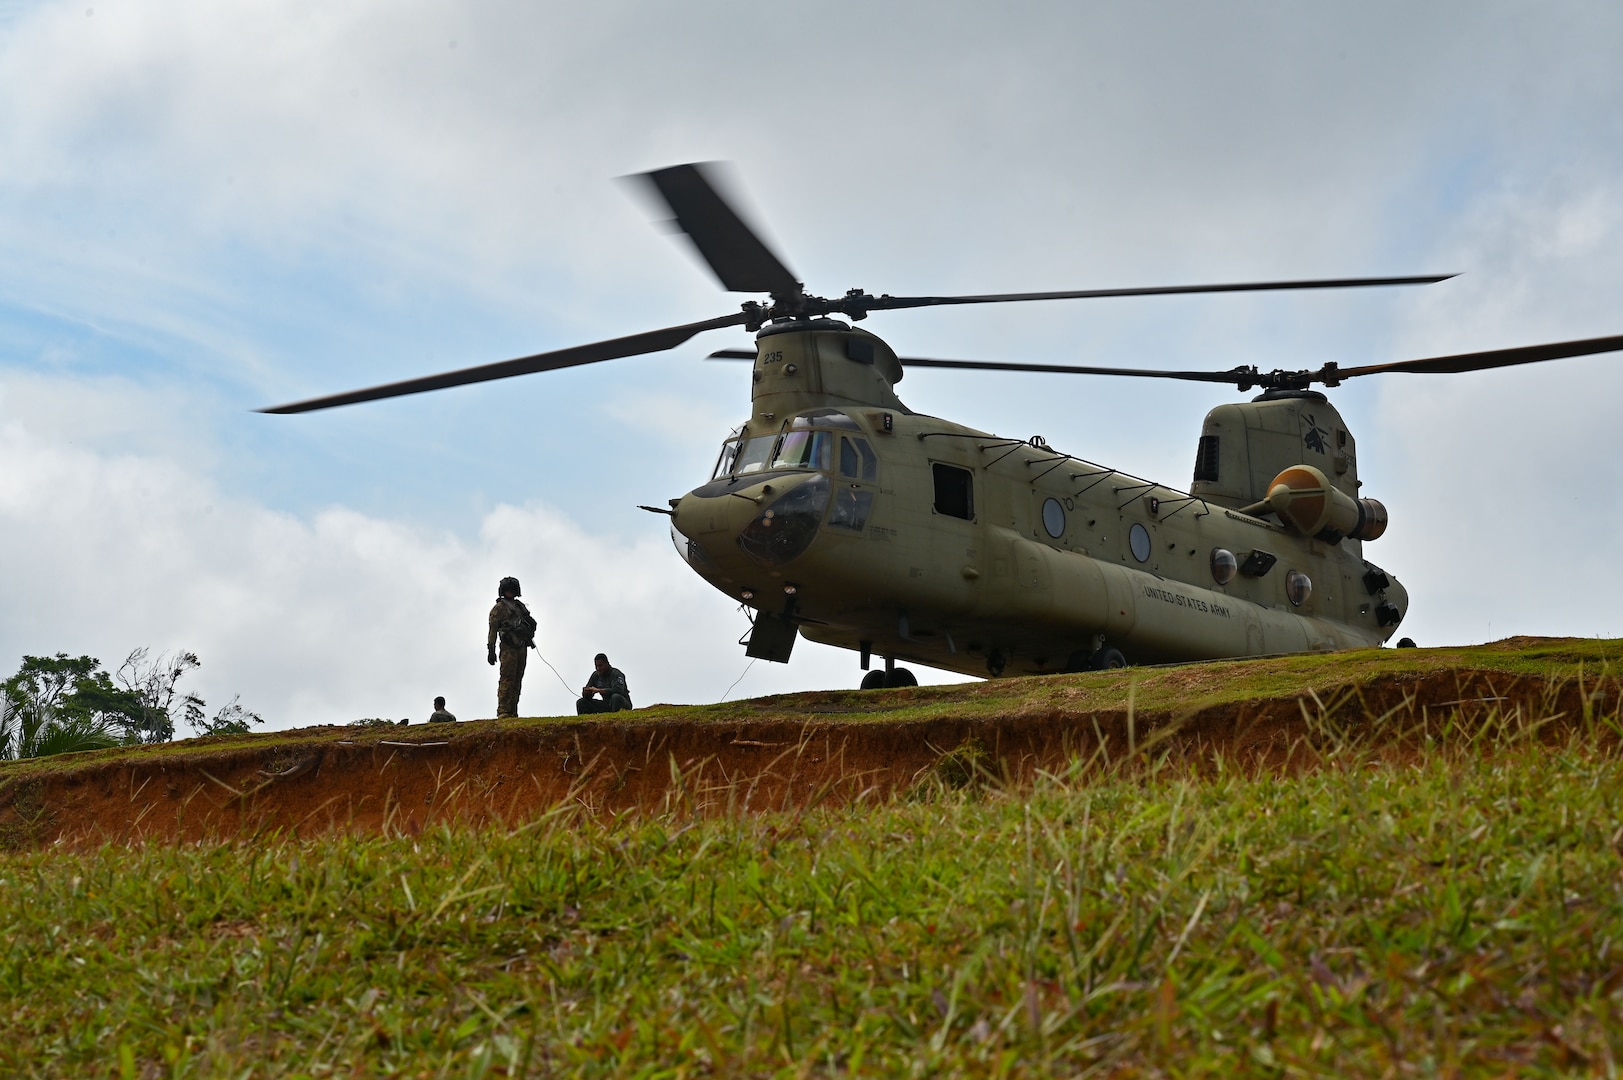 A CH-47 Chinook crew assigned to the 1st Battalion, 228th Aviation Regiment, await movement orders during exercise Keel Billed Toucan (known locally as Mercurio V) at a remote location in Panama May 7, 2023.